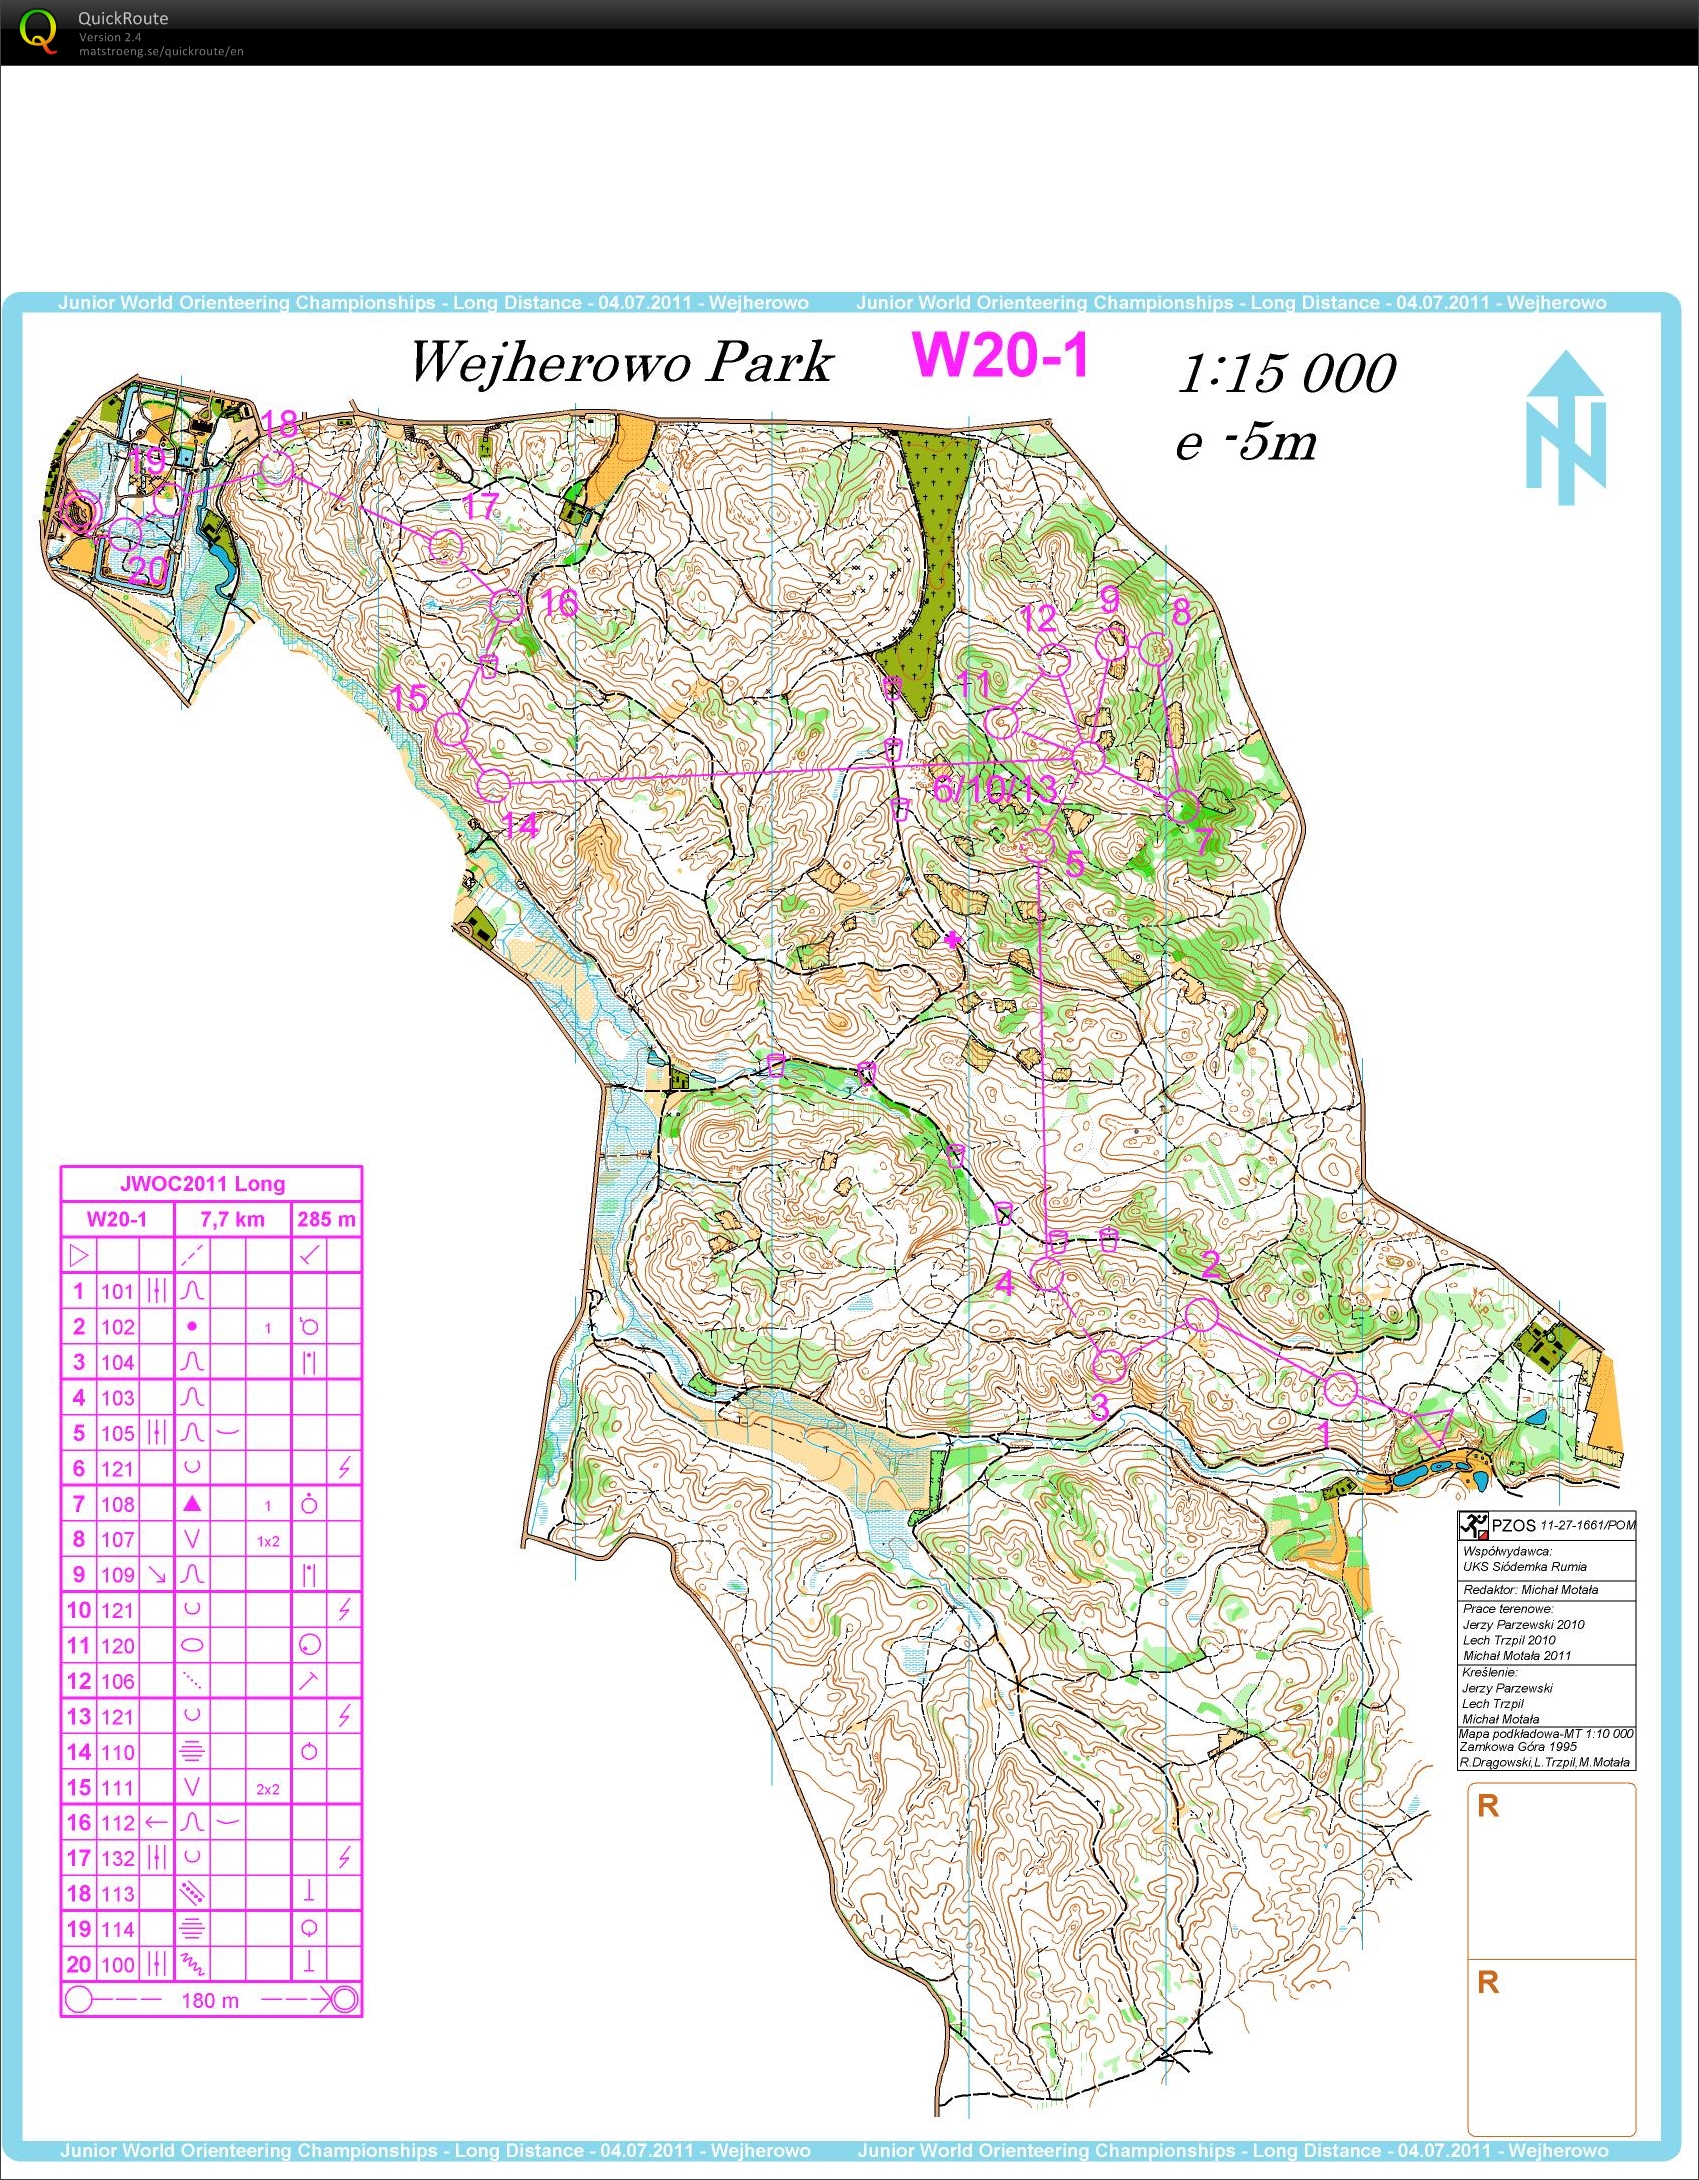 MP camp, long W20 from JWOC 2011 (13-09-2014)